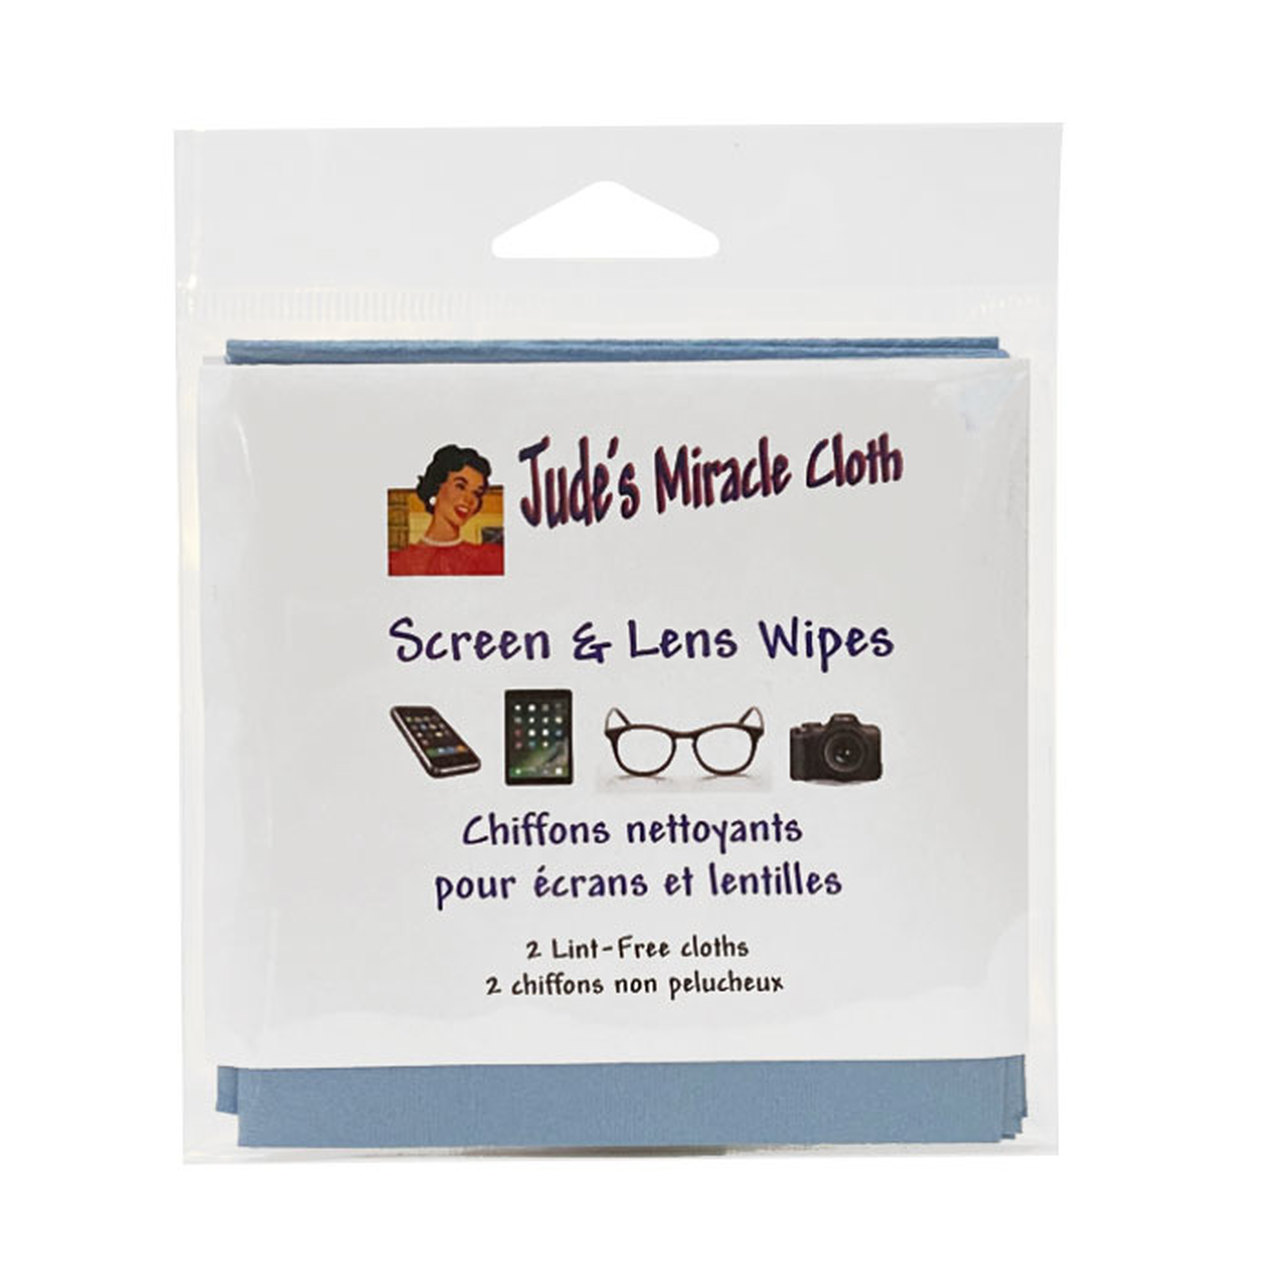 6260 - Jude's Screen and Lens Wipes